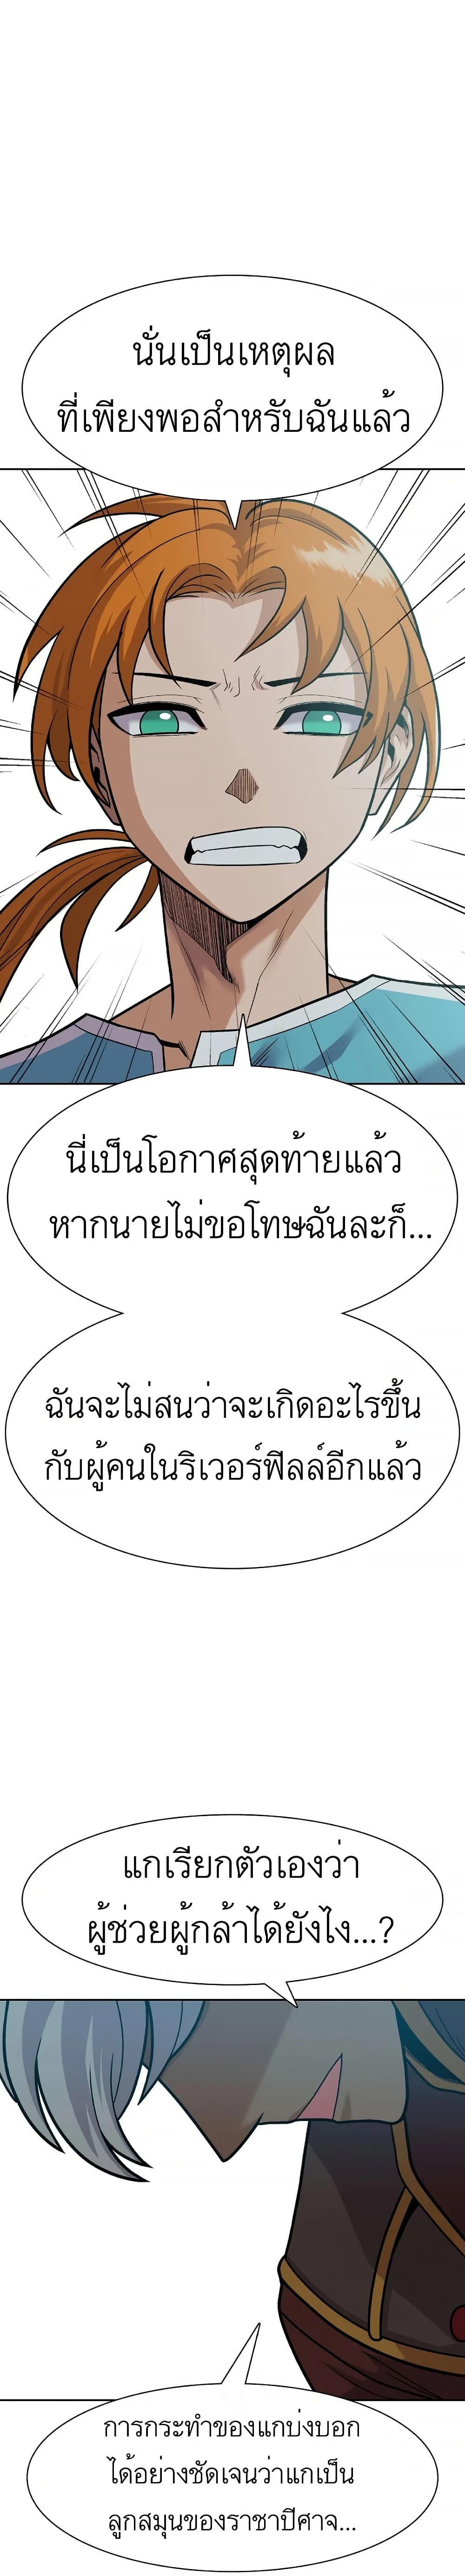 Raising Newbie Heroes In Another World ตอนที่ 16 (31)